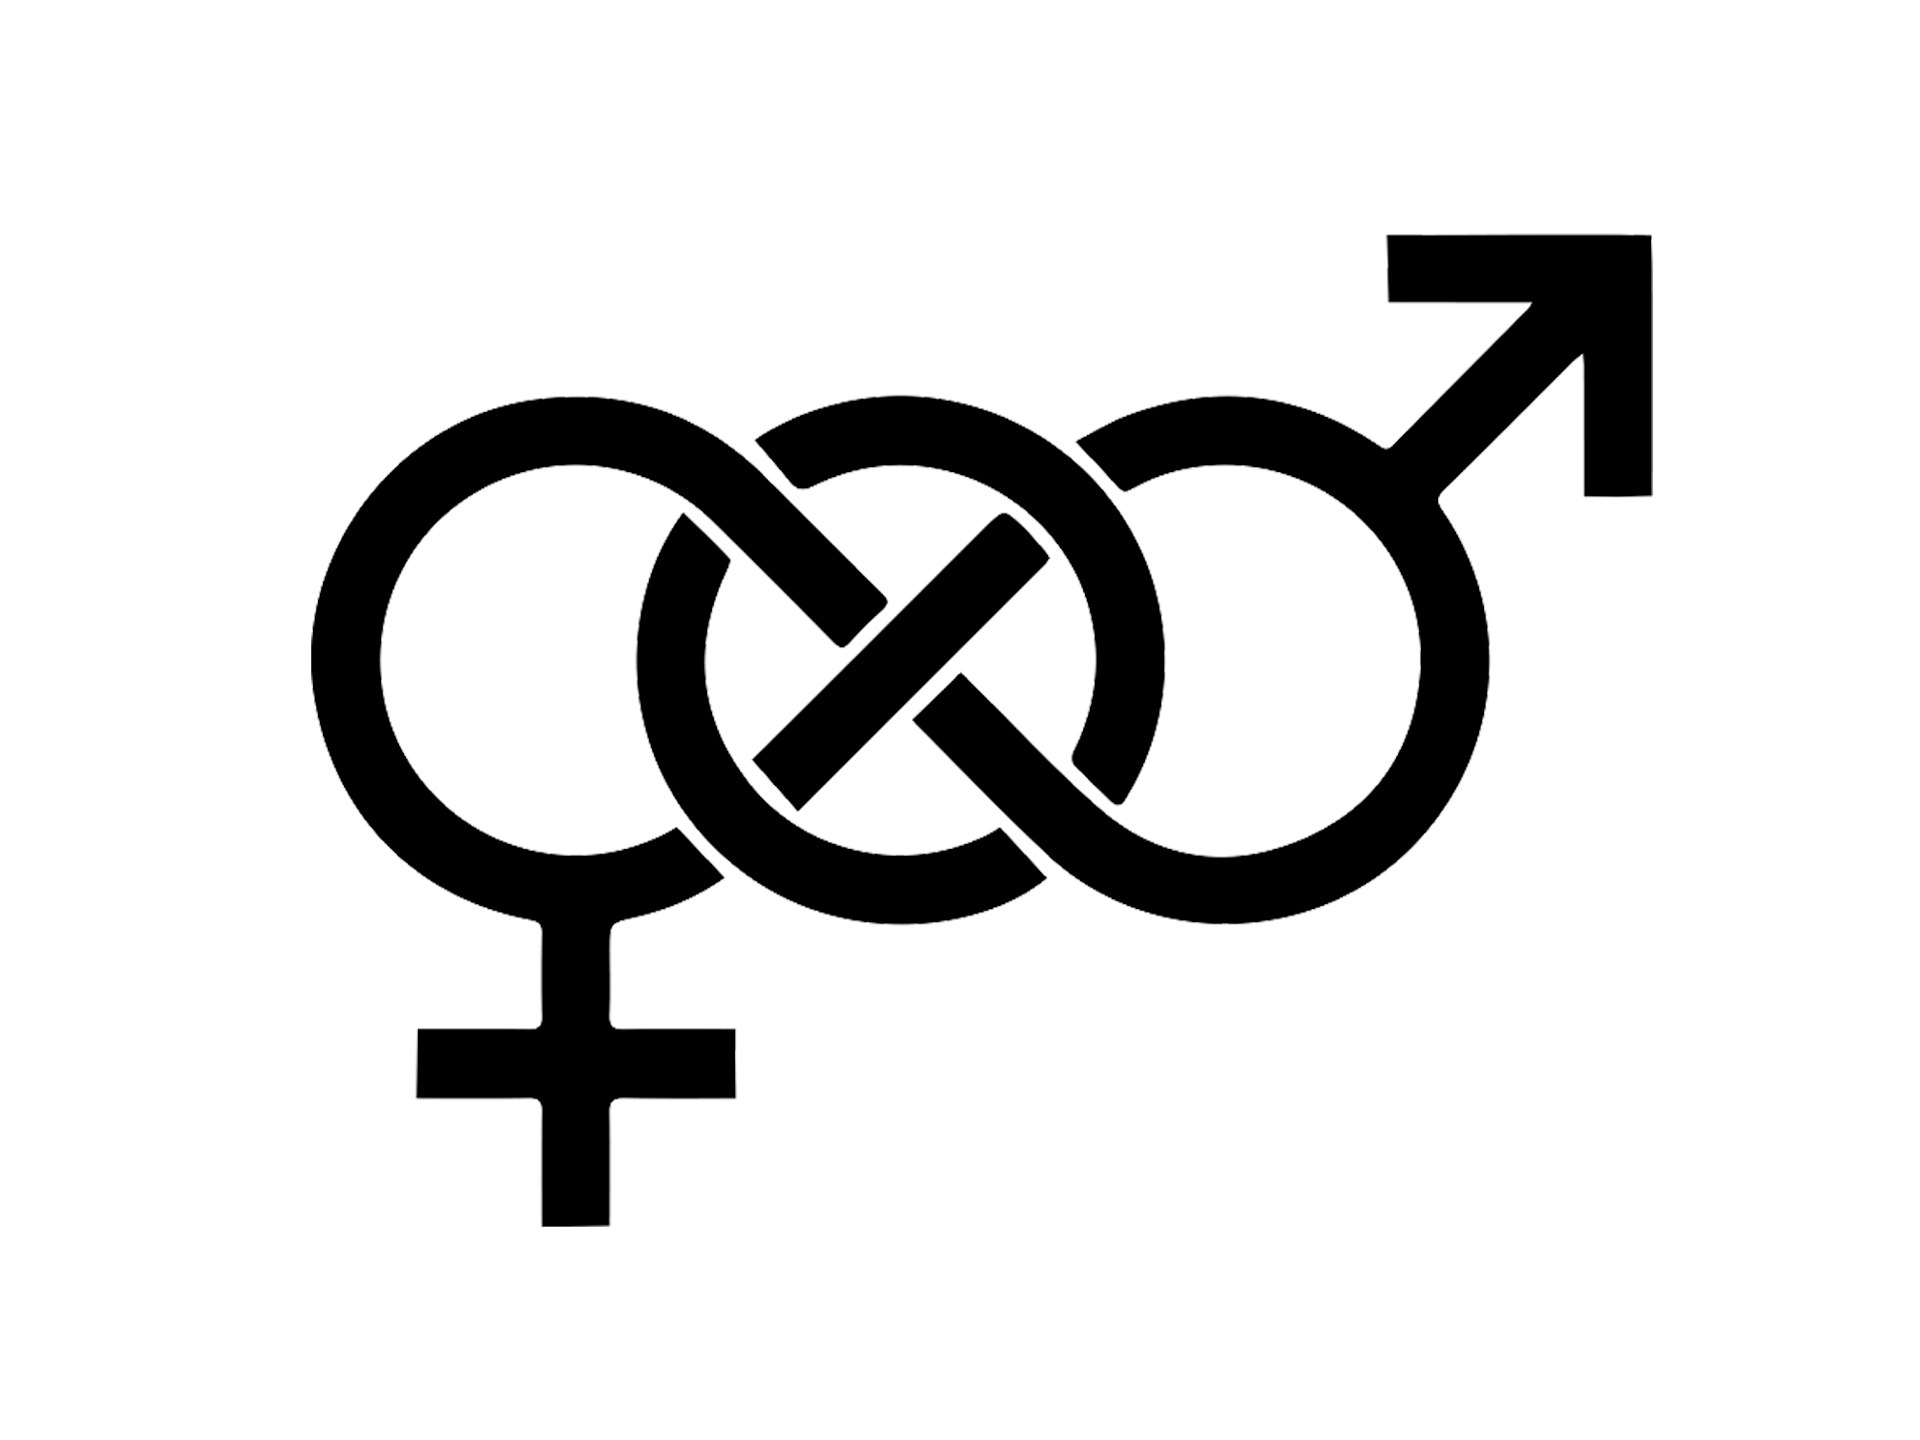 Why intersexuality will be the next civil rights frontier